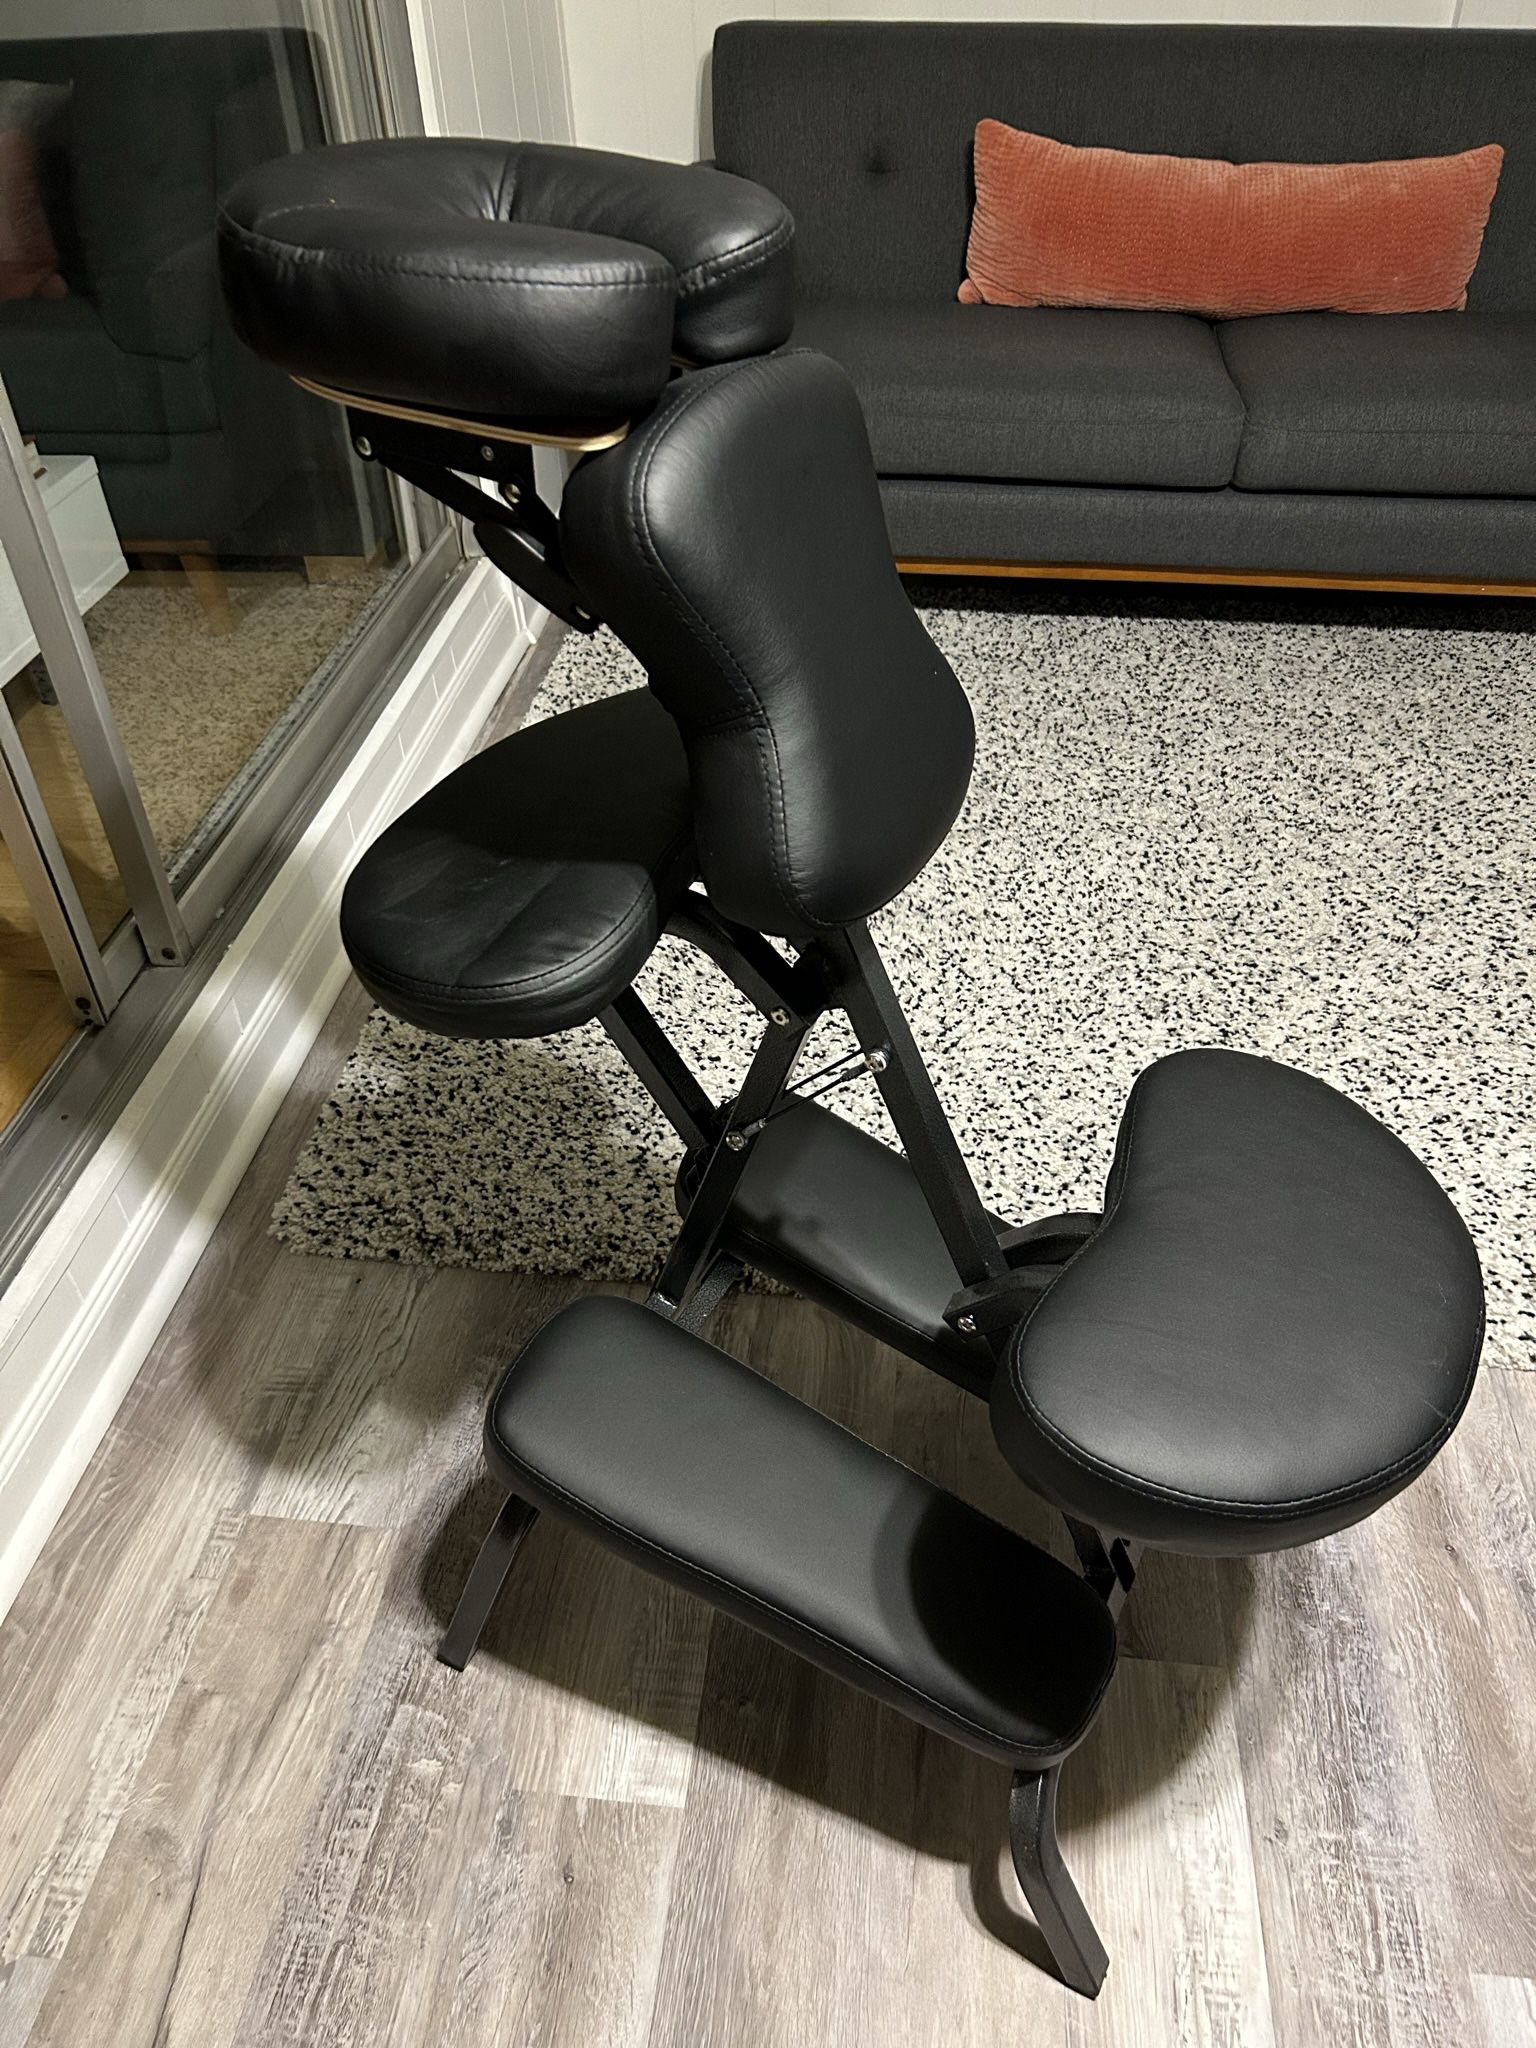 Portable Massage Chair Like New